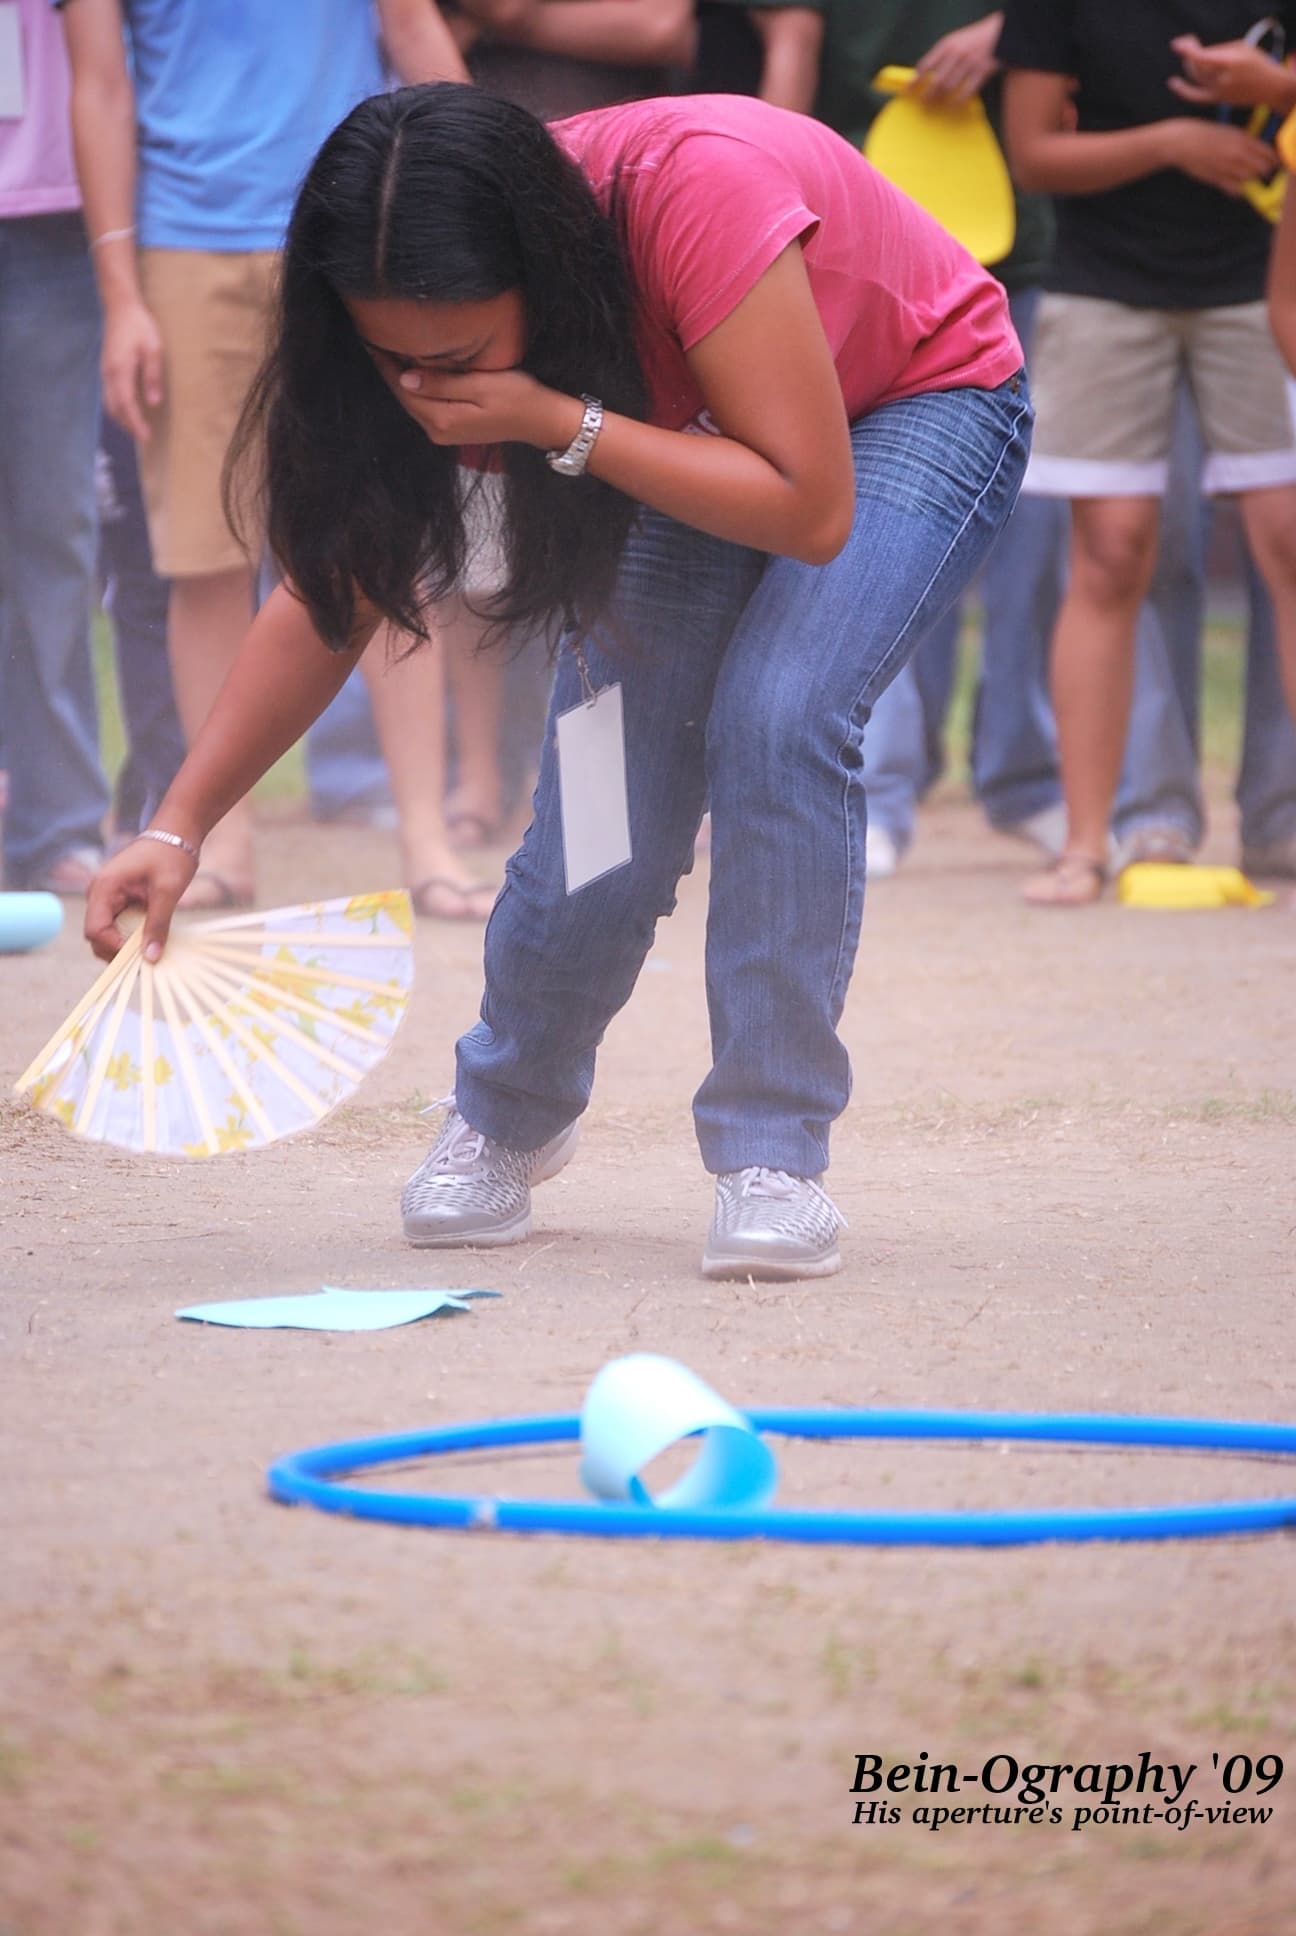 A participant covering her nose while fanning a paper on the ground